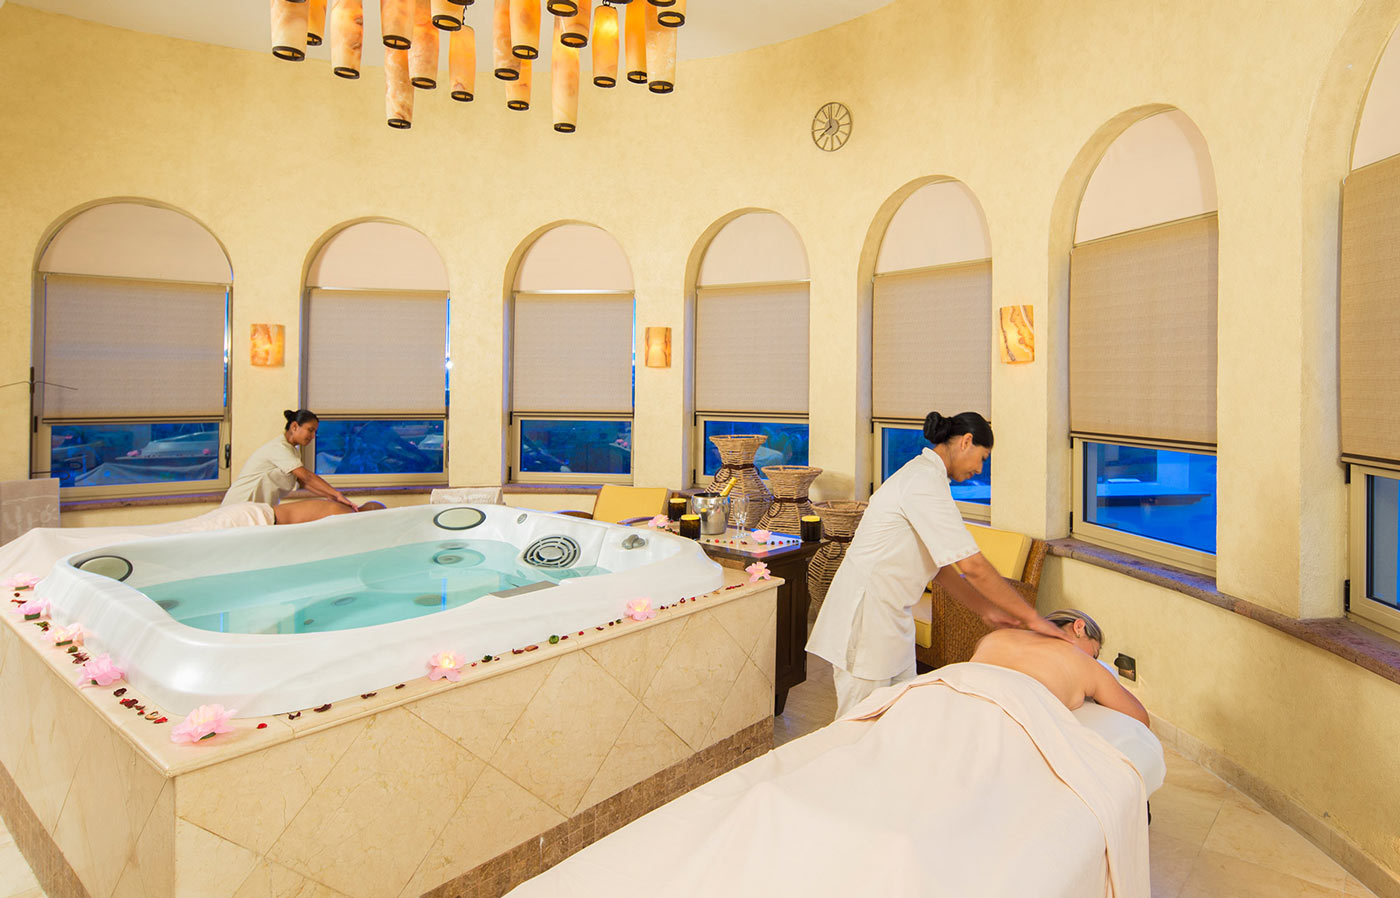 Therapists giving couples massage at Cabo San Lucas Desert Spa at Villa del Arco.